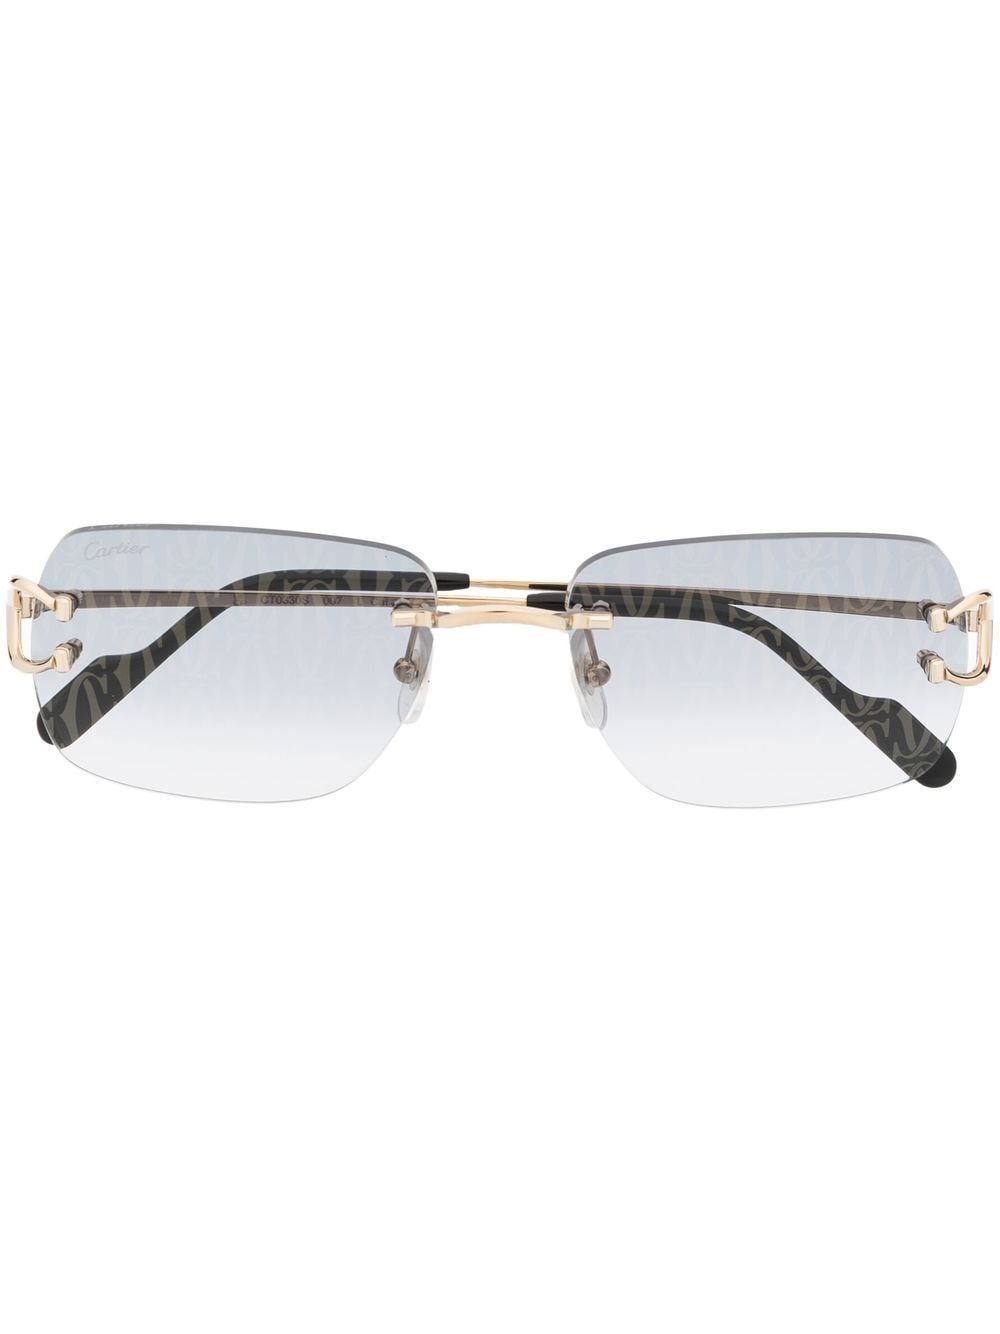 Cartier Lens Decal Pattern Sunglasses In Gold